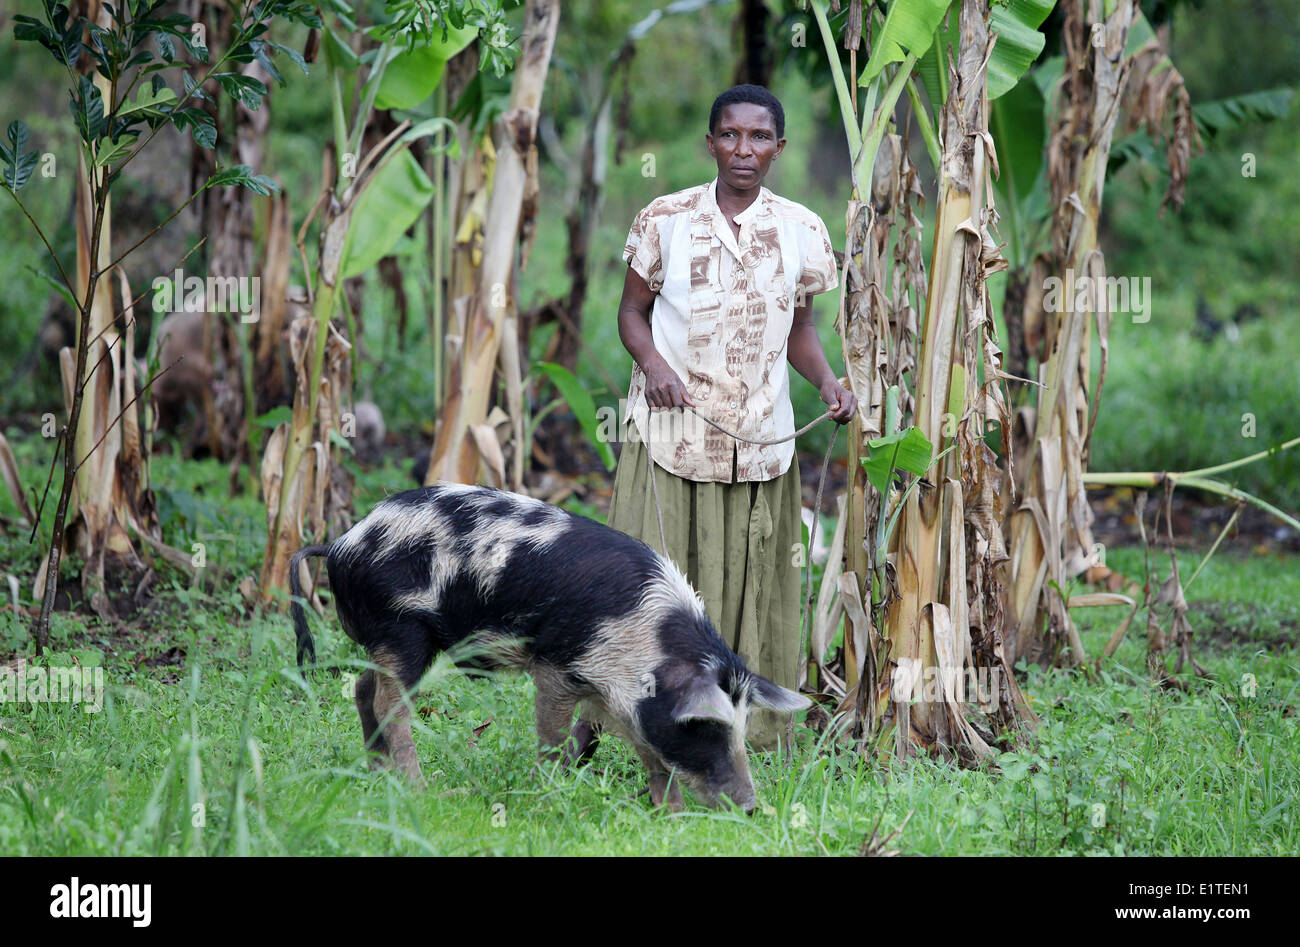 A woman and her pig in the Nakasongola region of Uganda Stock Photo